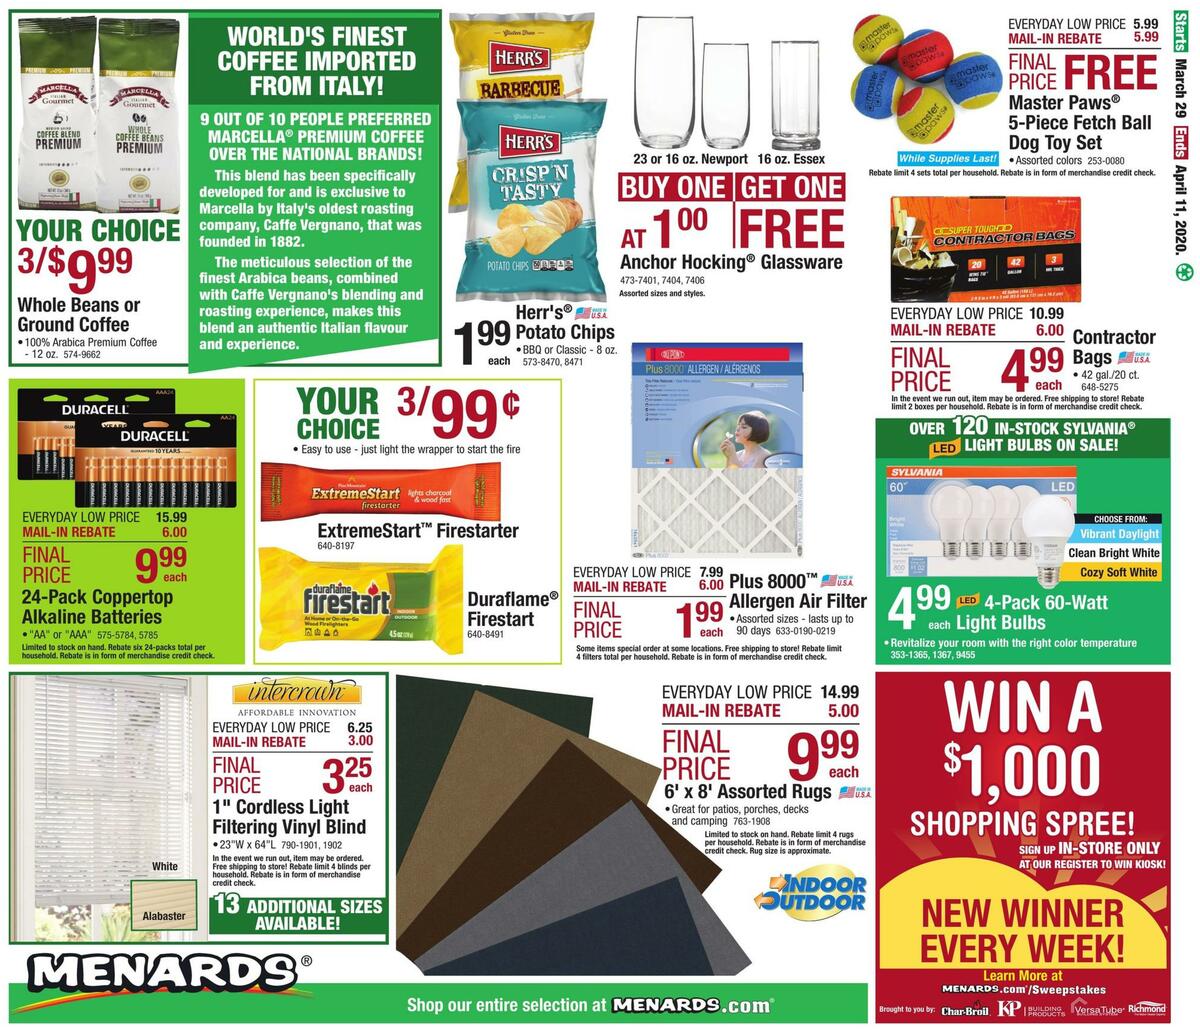 Menards Weekly Ads & Special Buys for March 29 - Page 38